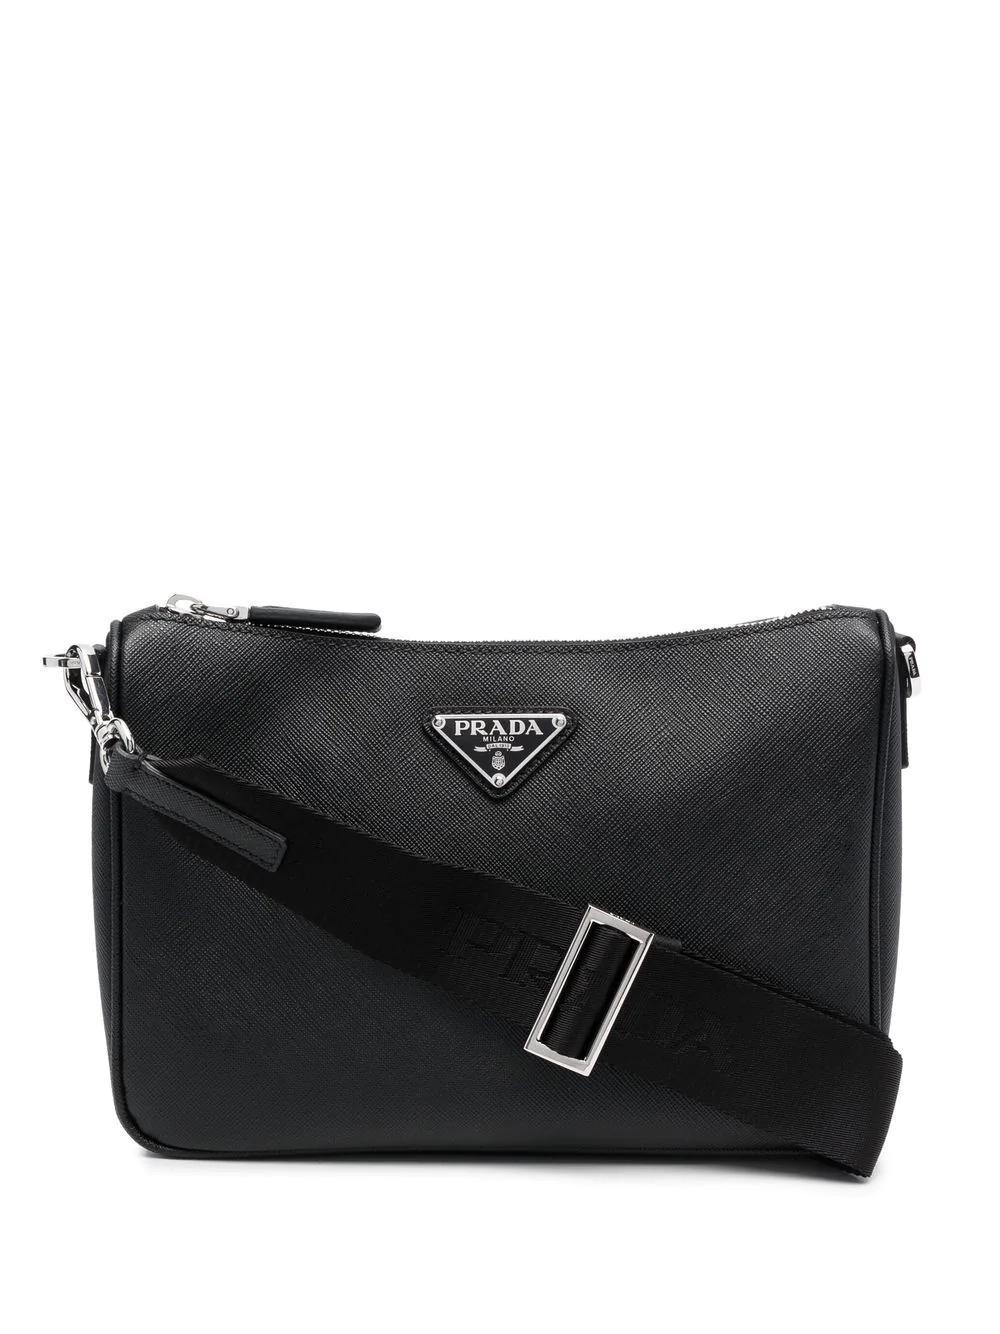 Snag the Latest PRADA Leather Crossbody Bags for Women with Fast and Free  Shipping. Authenticity Guaranteed on Designer Handbags $500+ at .